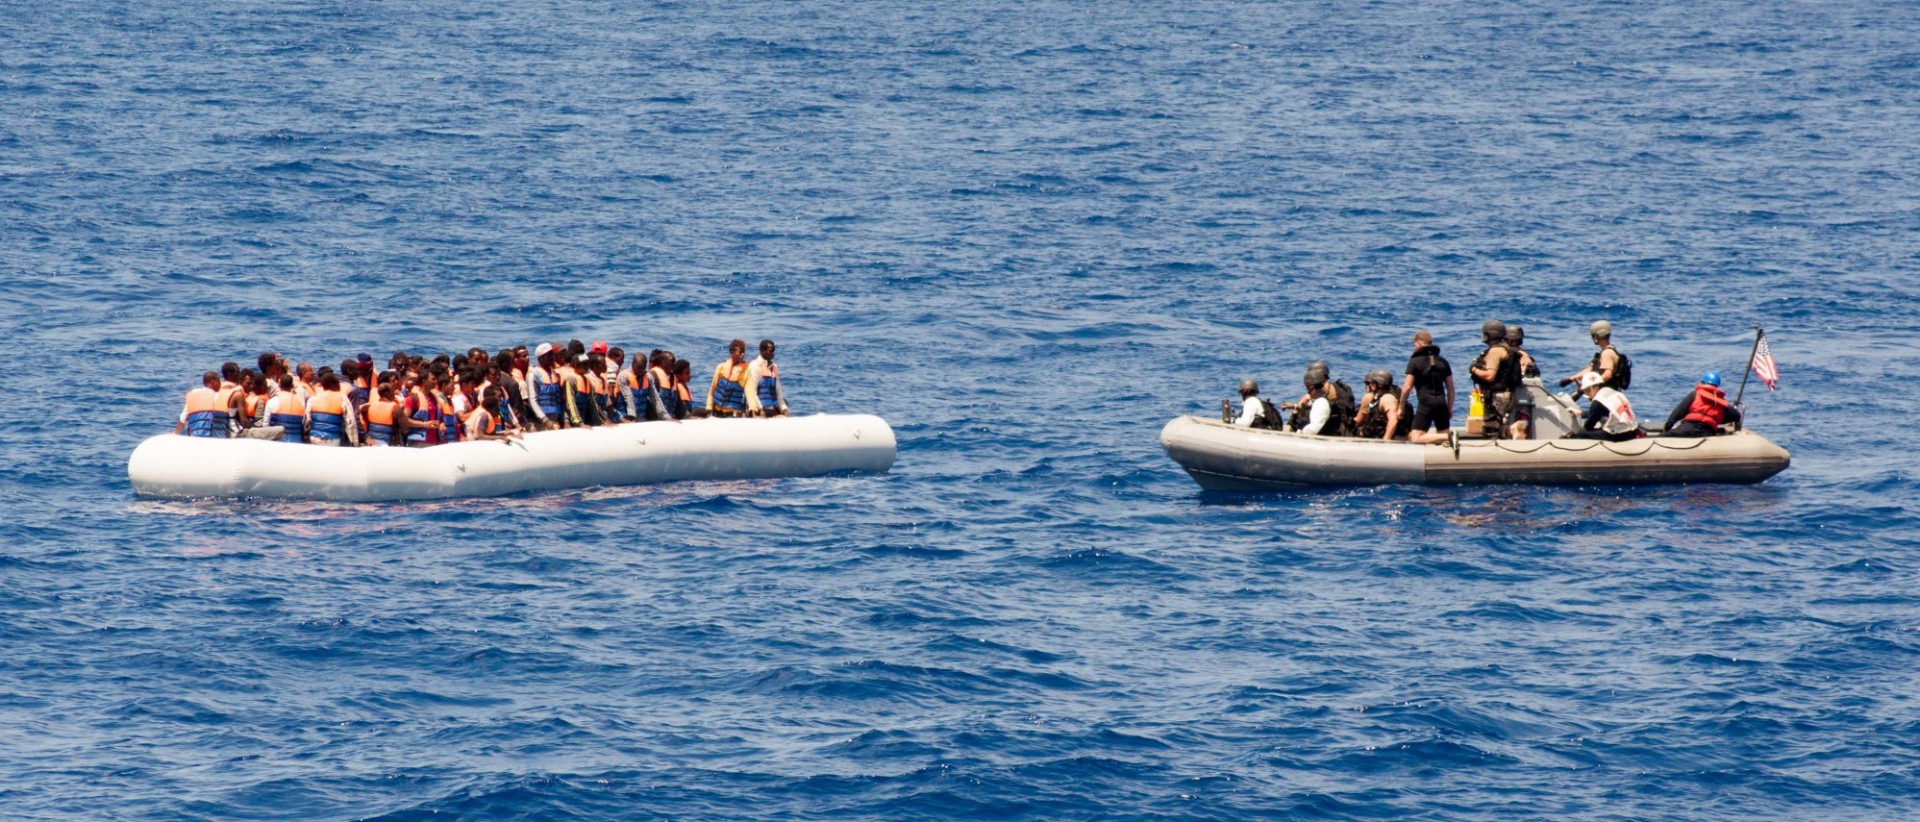 Sailors assigned to USS Carney (DDG 64) approach a small craft full of migrants while on patrol in the Mediterranean Sea July 29, 2016